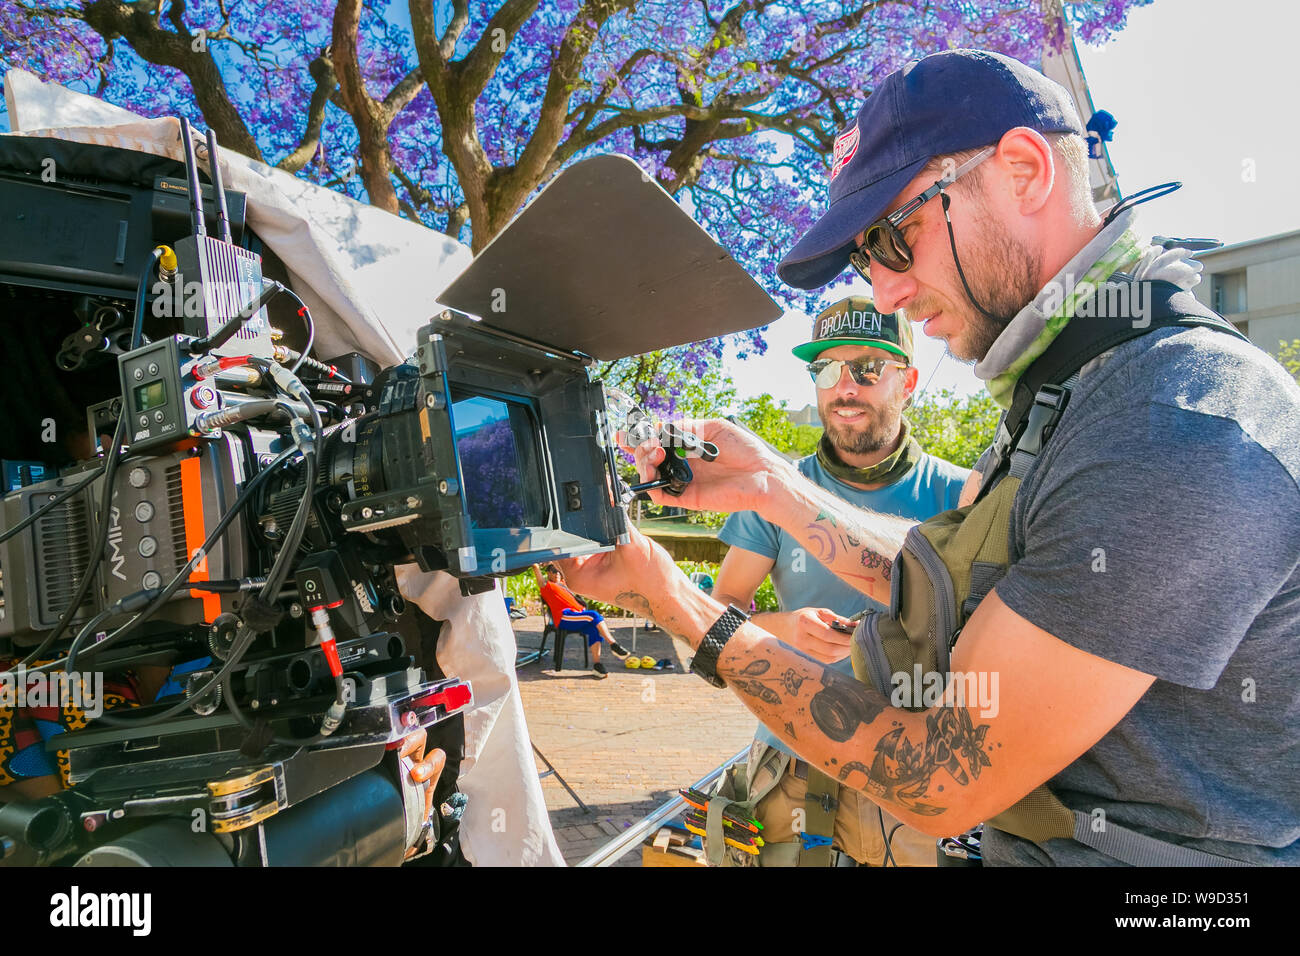 Johannesburg, South Africa - October 09 2018: Behind the scenes of a  Television advert Film Set on location at a University Campus Stock Photo -  Alamy